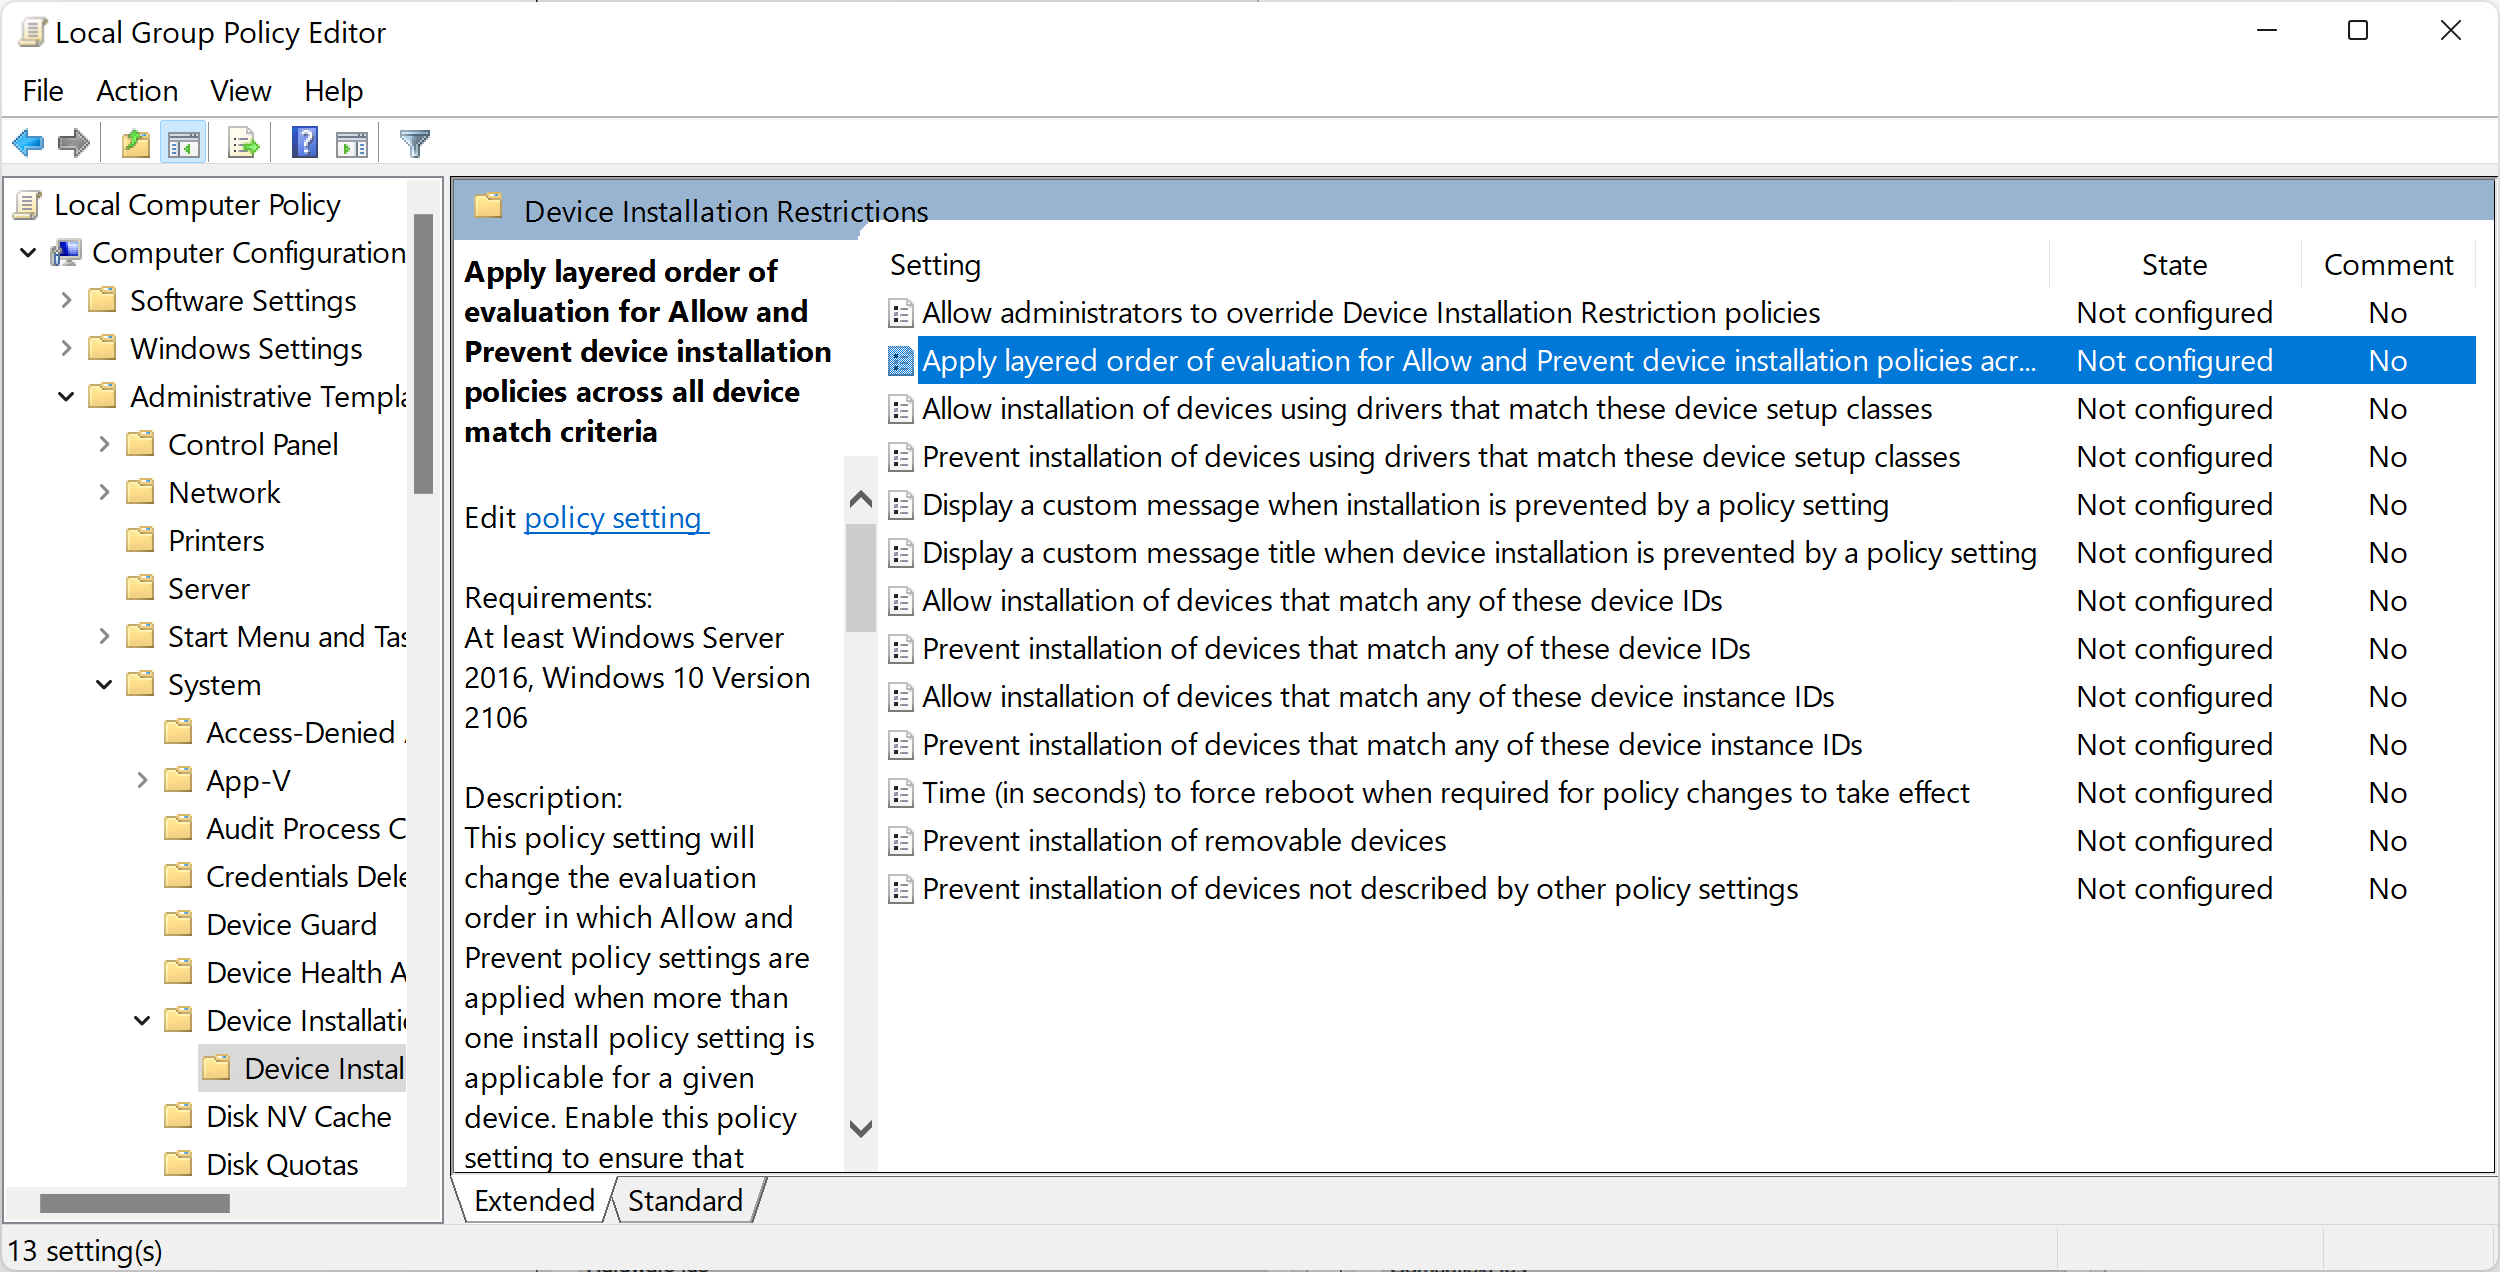 Group Policy Editor interface.